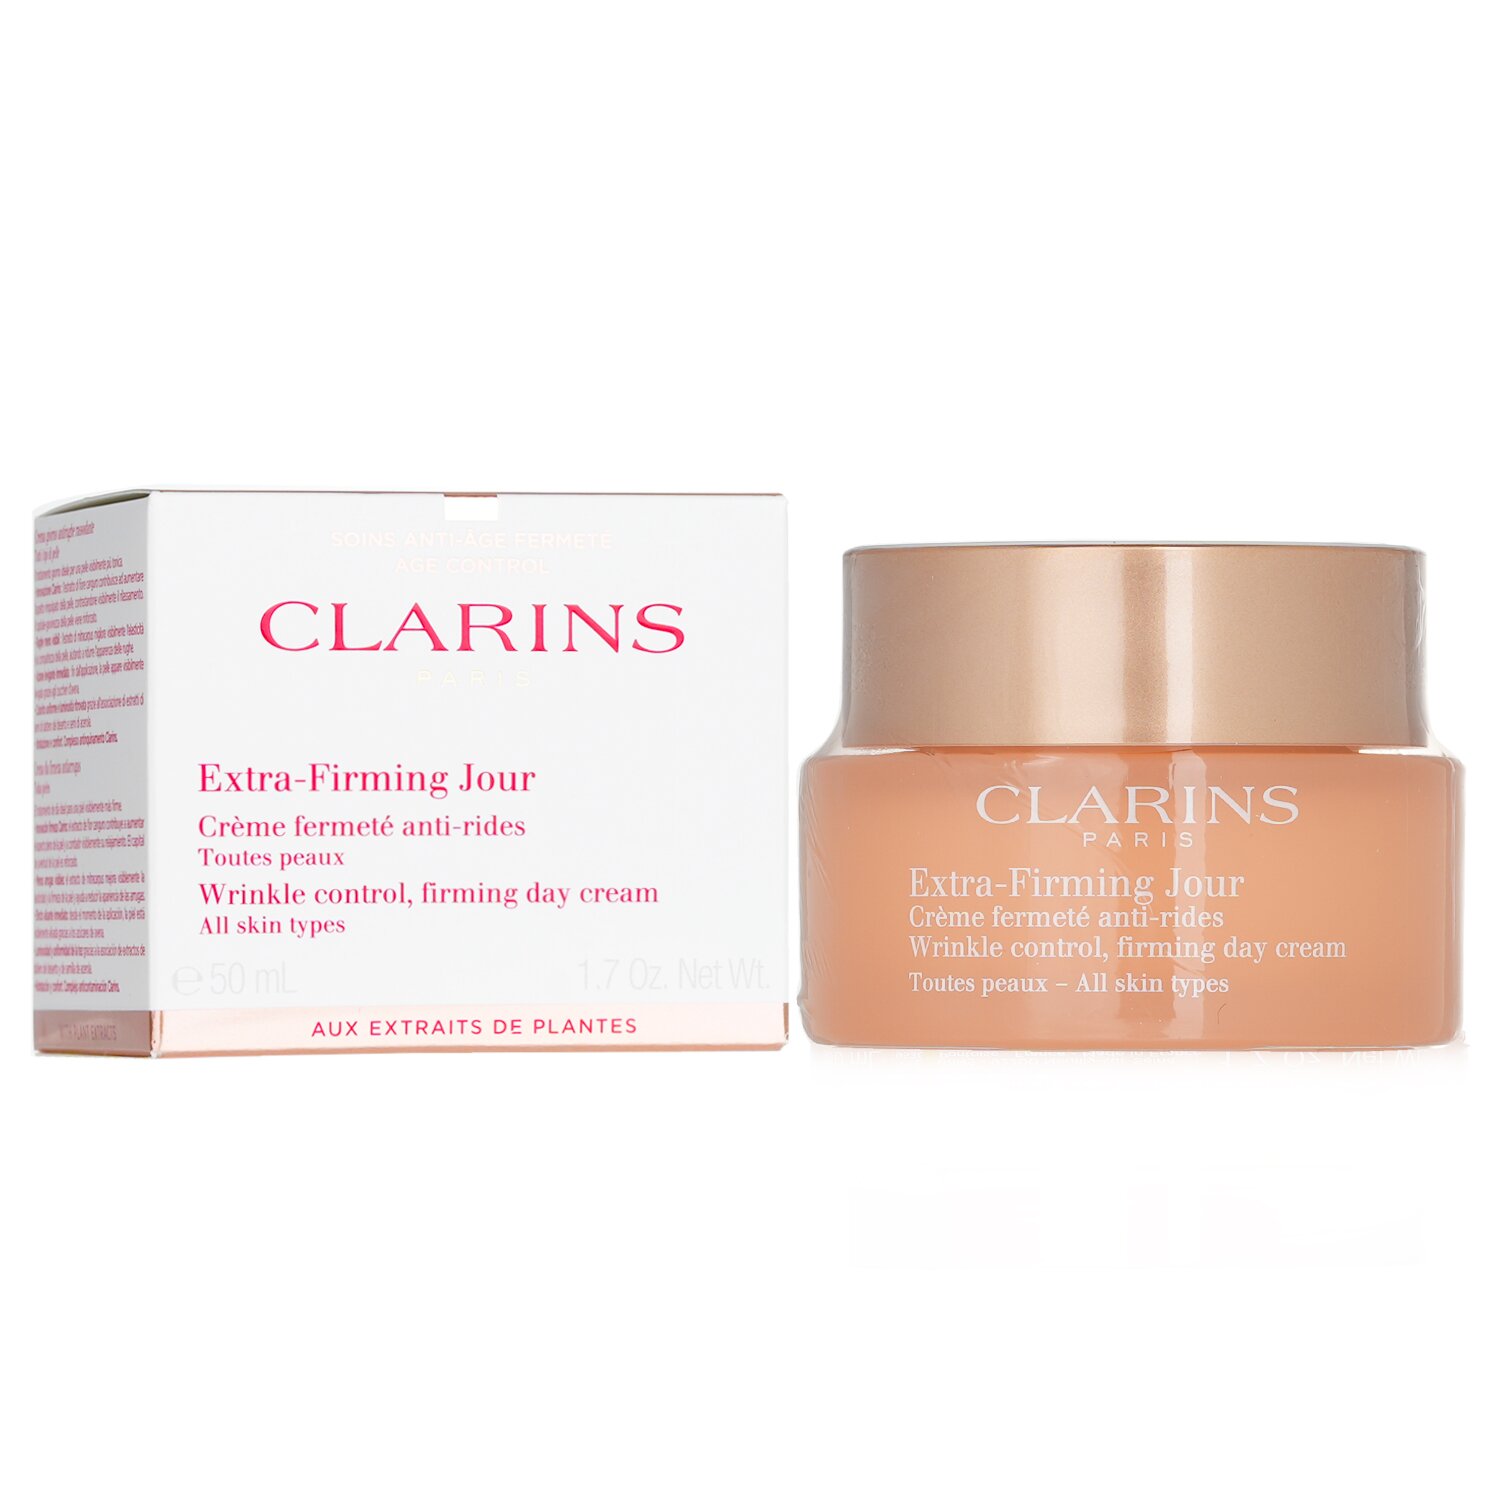 Clarins Extra-Firming Jour Wrinkle Control, Firming Day Cream - All Skin Types 50ml/1.7oz